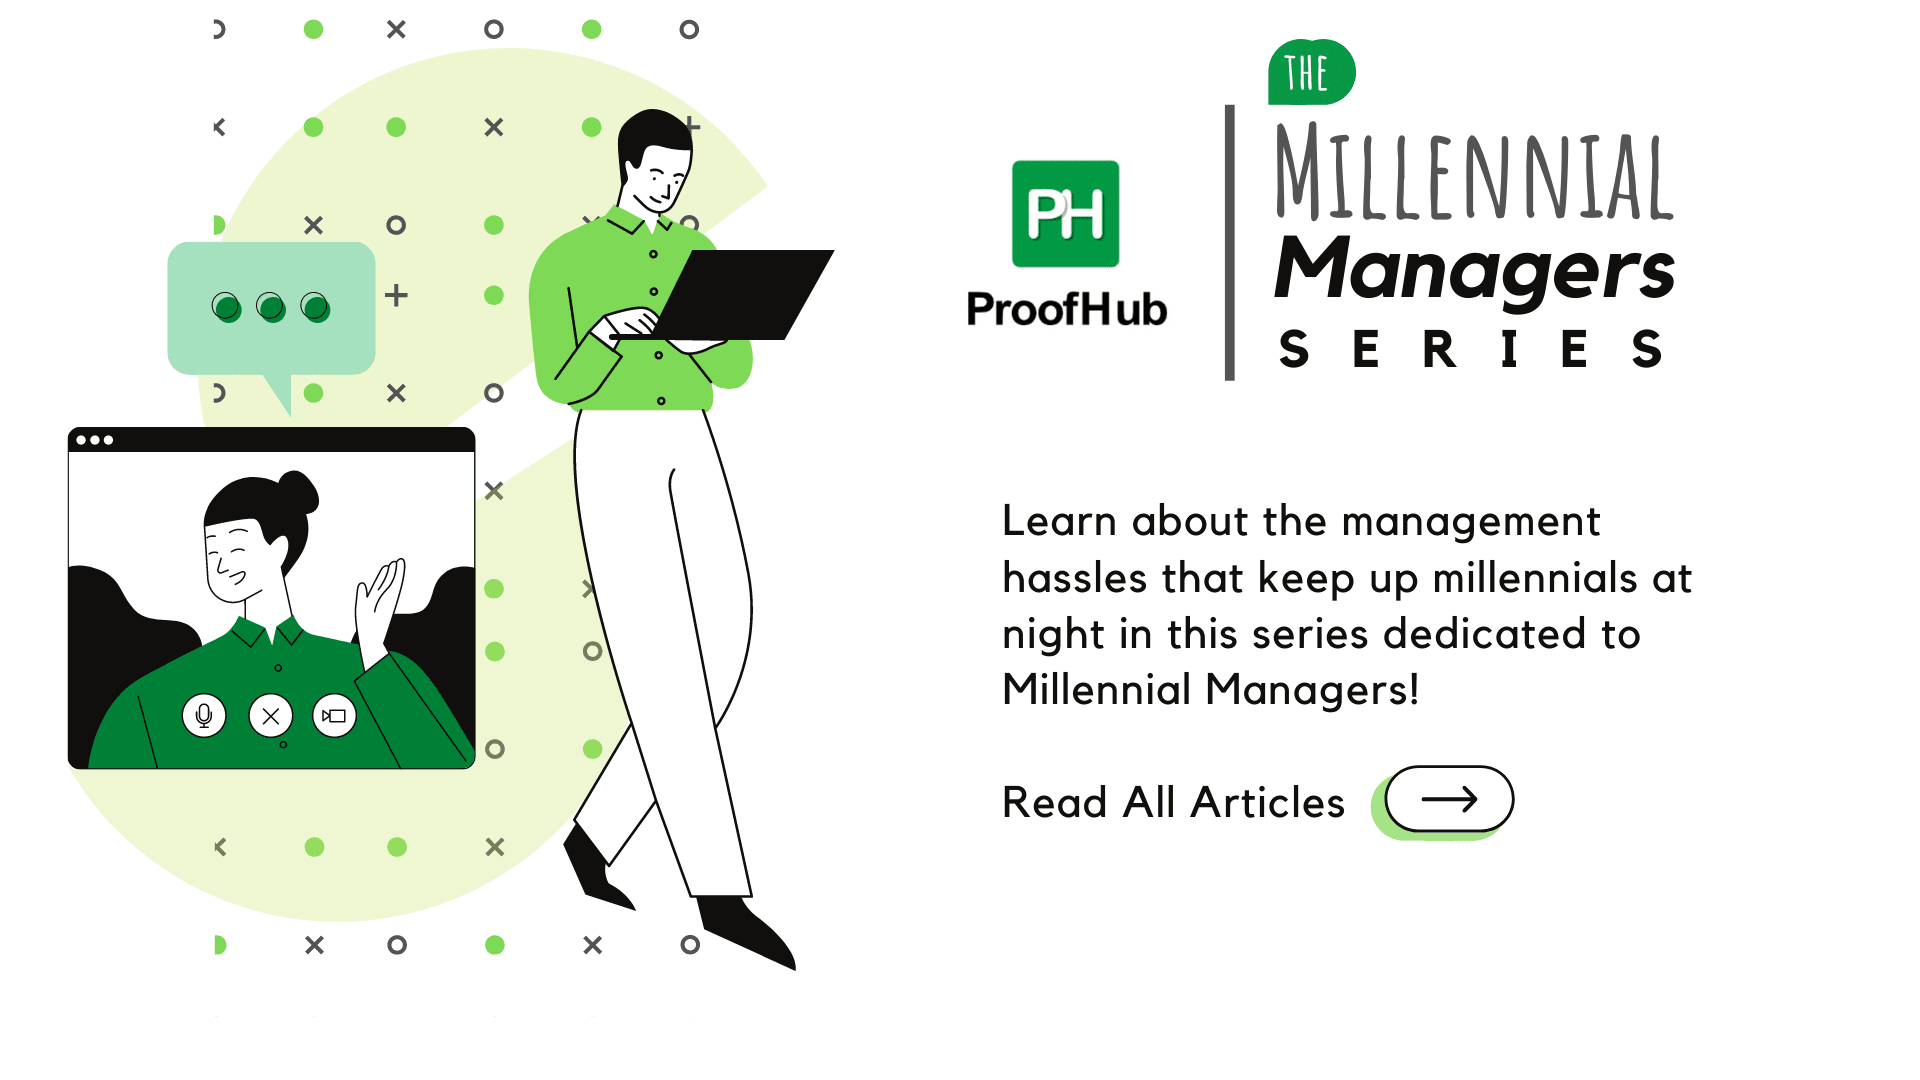 The Millennial Manager Series